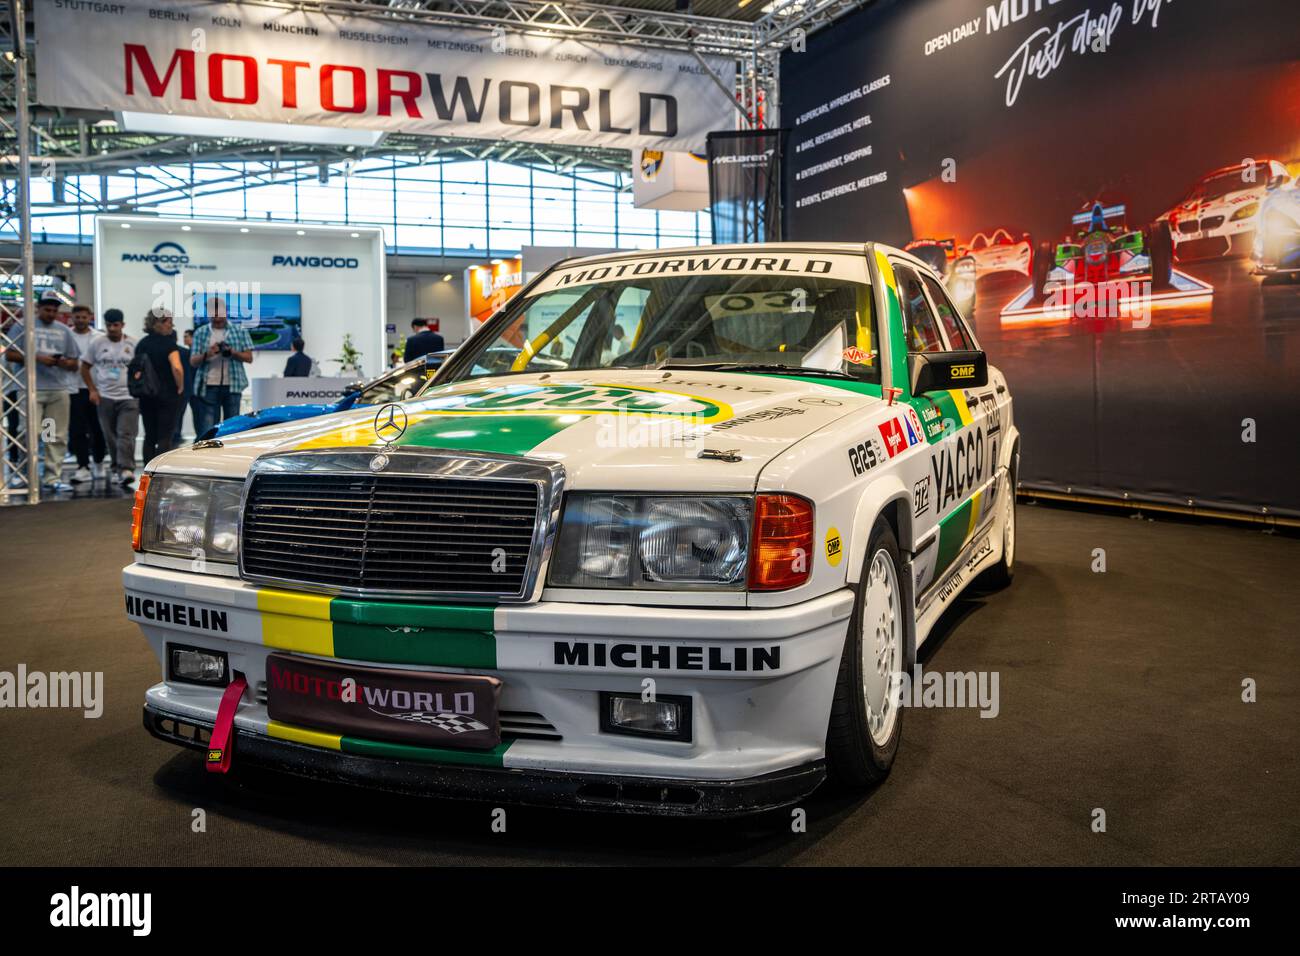 Mercedes-Benz 190E on a stand advertising the Motorworld event at IAA Mobility 2023, Munich Germany. Stock Photo